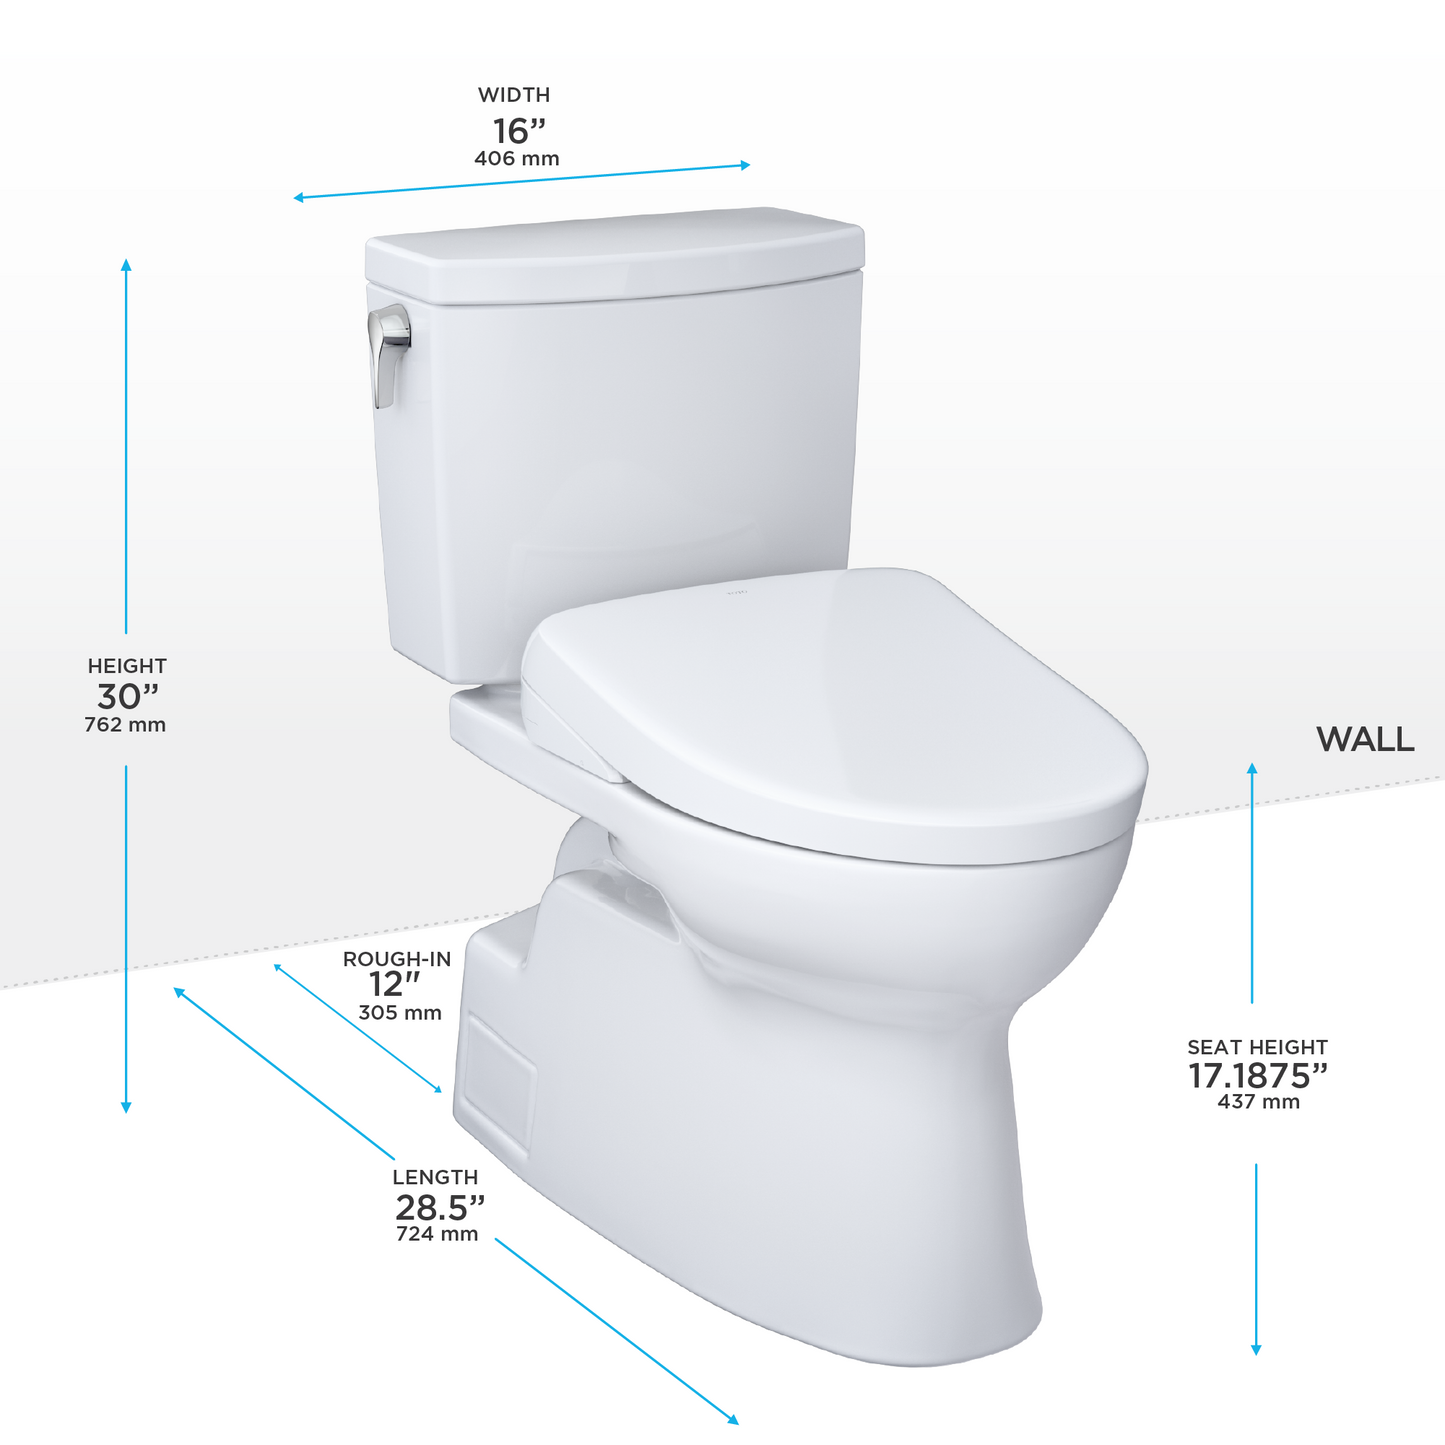 TOTO® WASHLET®+ Vespin® II 1G® Two-Piece Elongated 1.0 GPF Toilet and WASHLET®+ S7A Contemporary Bidet Seat, Cotton White - MW4744736CUFG#01